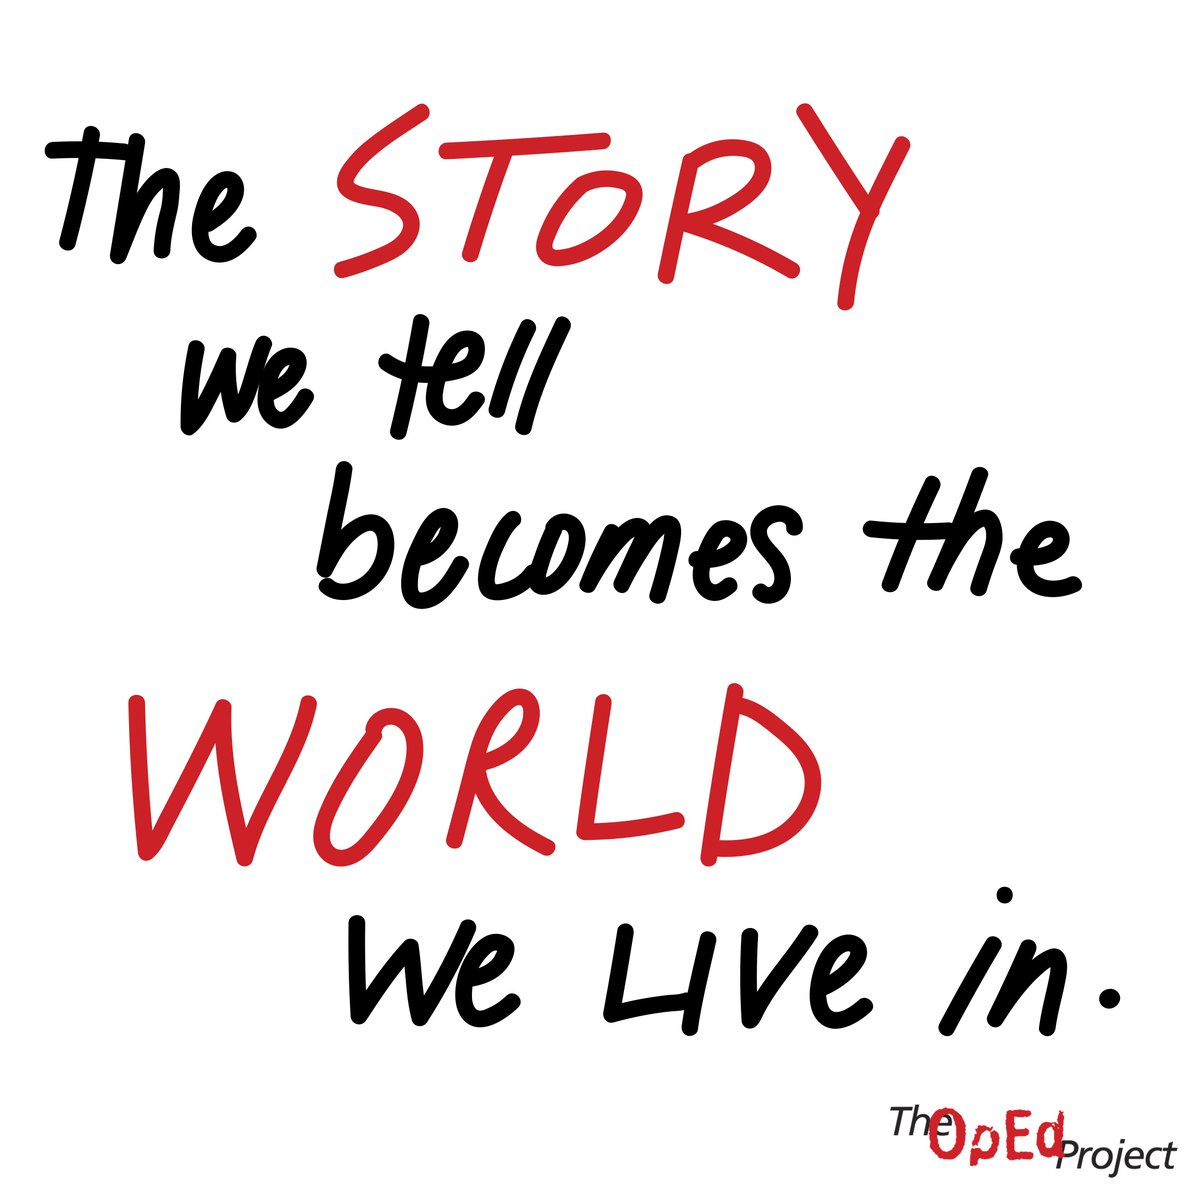 'The story we tell becomes the world we live in.' - @TheOpEdProject Join us! We offer #WriteToChangeTheWorld workshops, weekly #AskAJournalist office hours, monthly Expert Talks, Private Coaching and more. Scholarships available for those who'd benefit: theopedproject.org/communityresou…